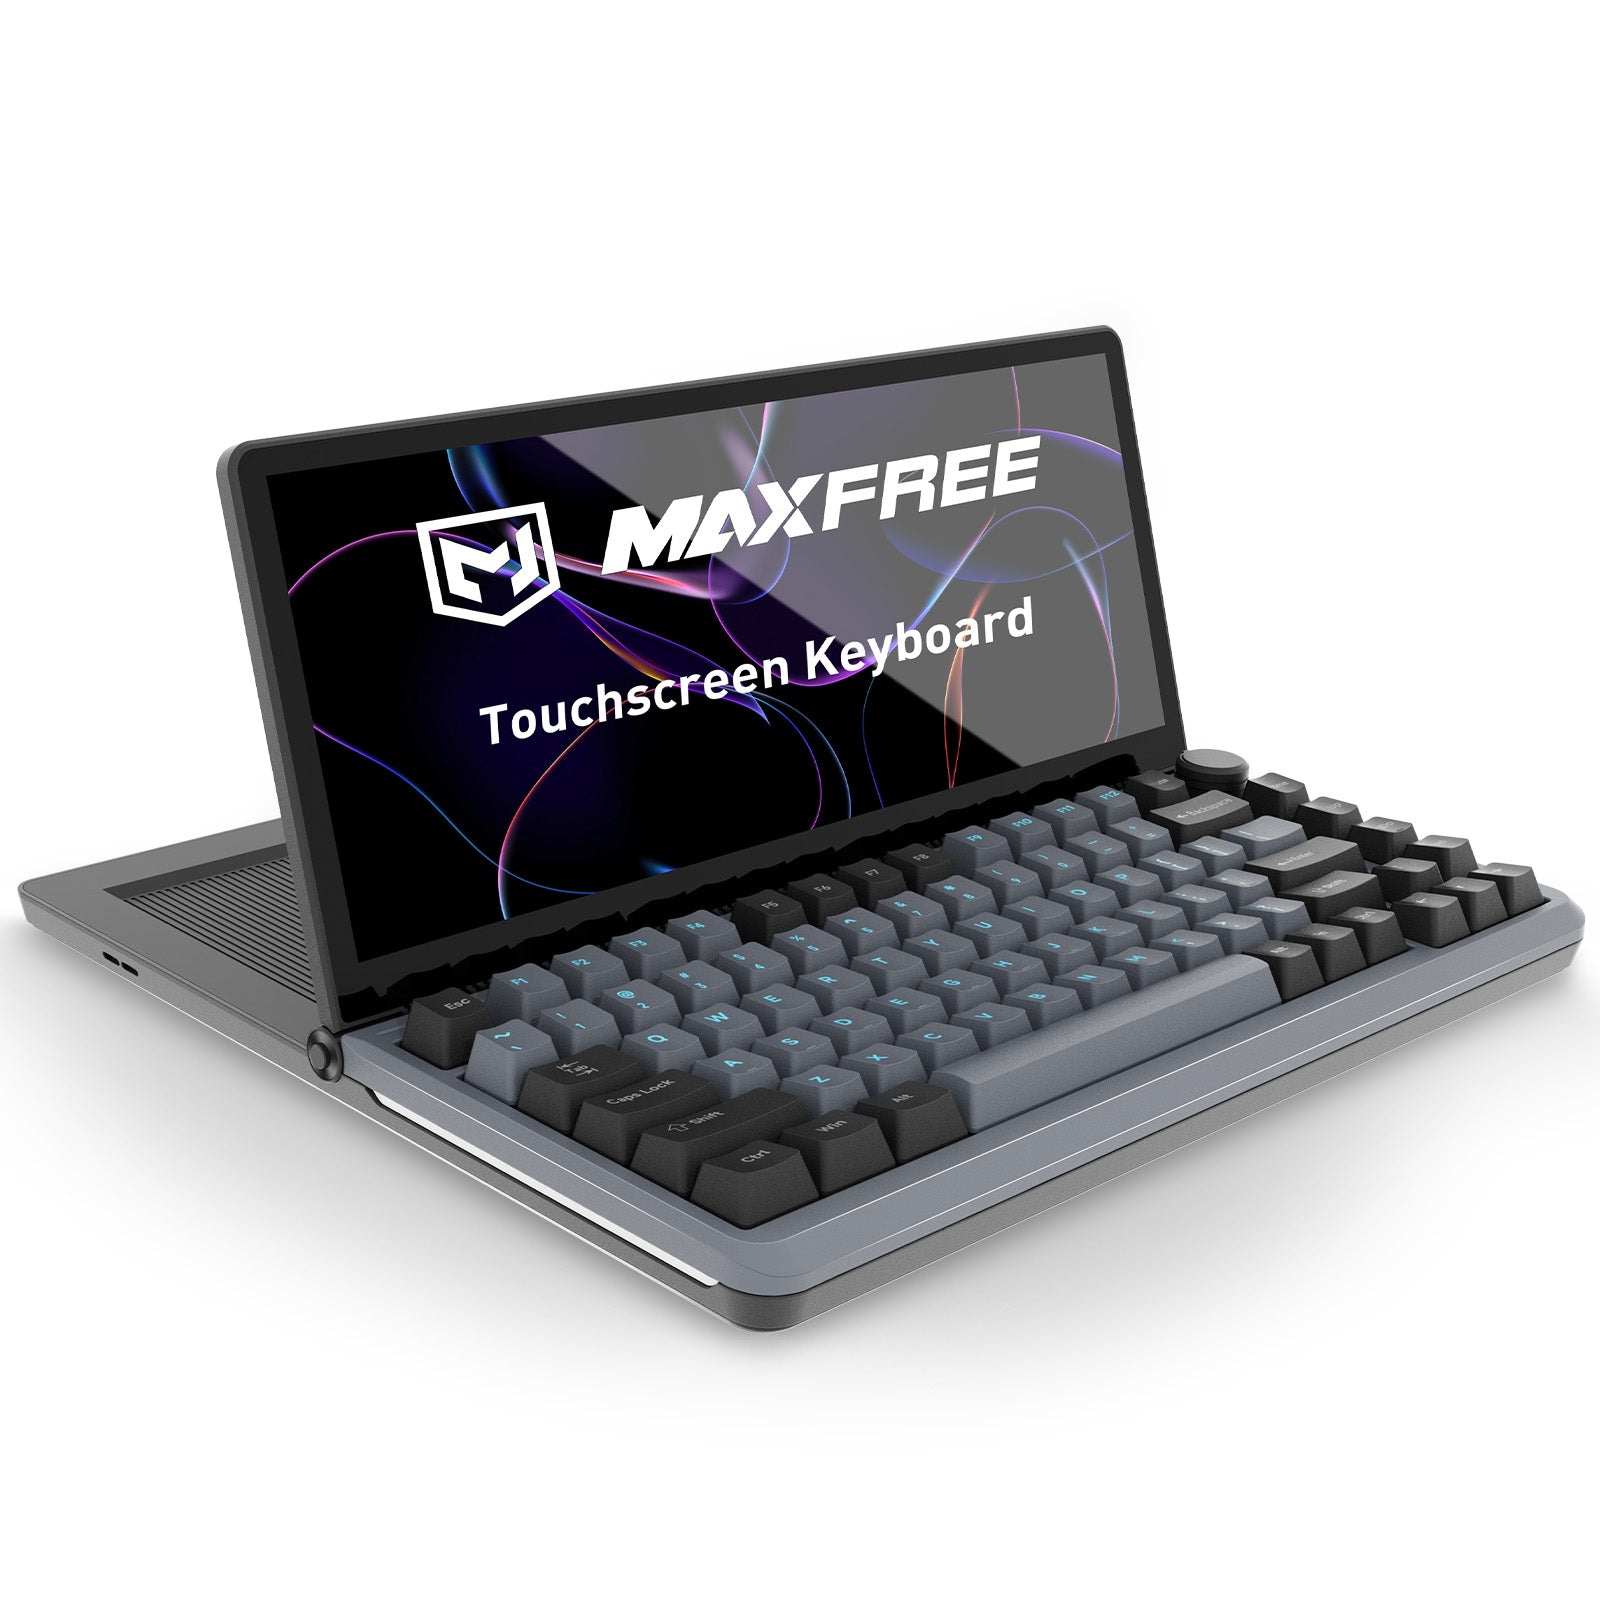 Maxfree K3 13" With 82 Keys Mechanical Keyboard 10-Point Touch Screen